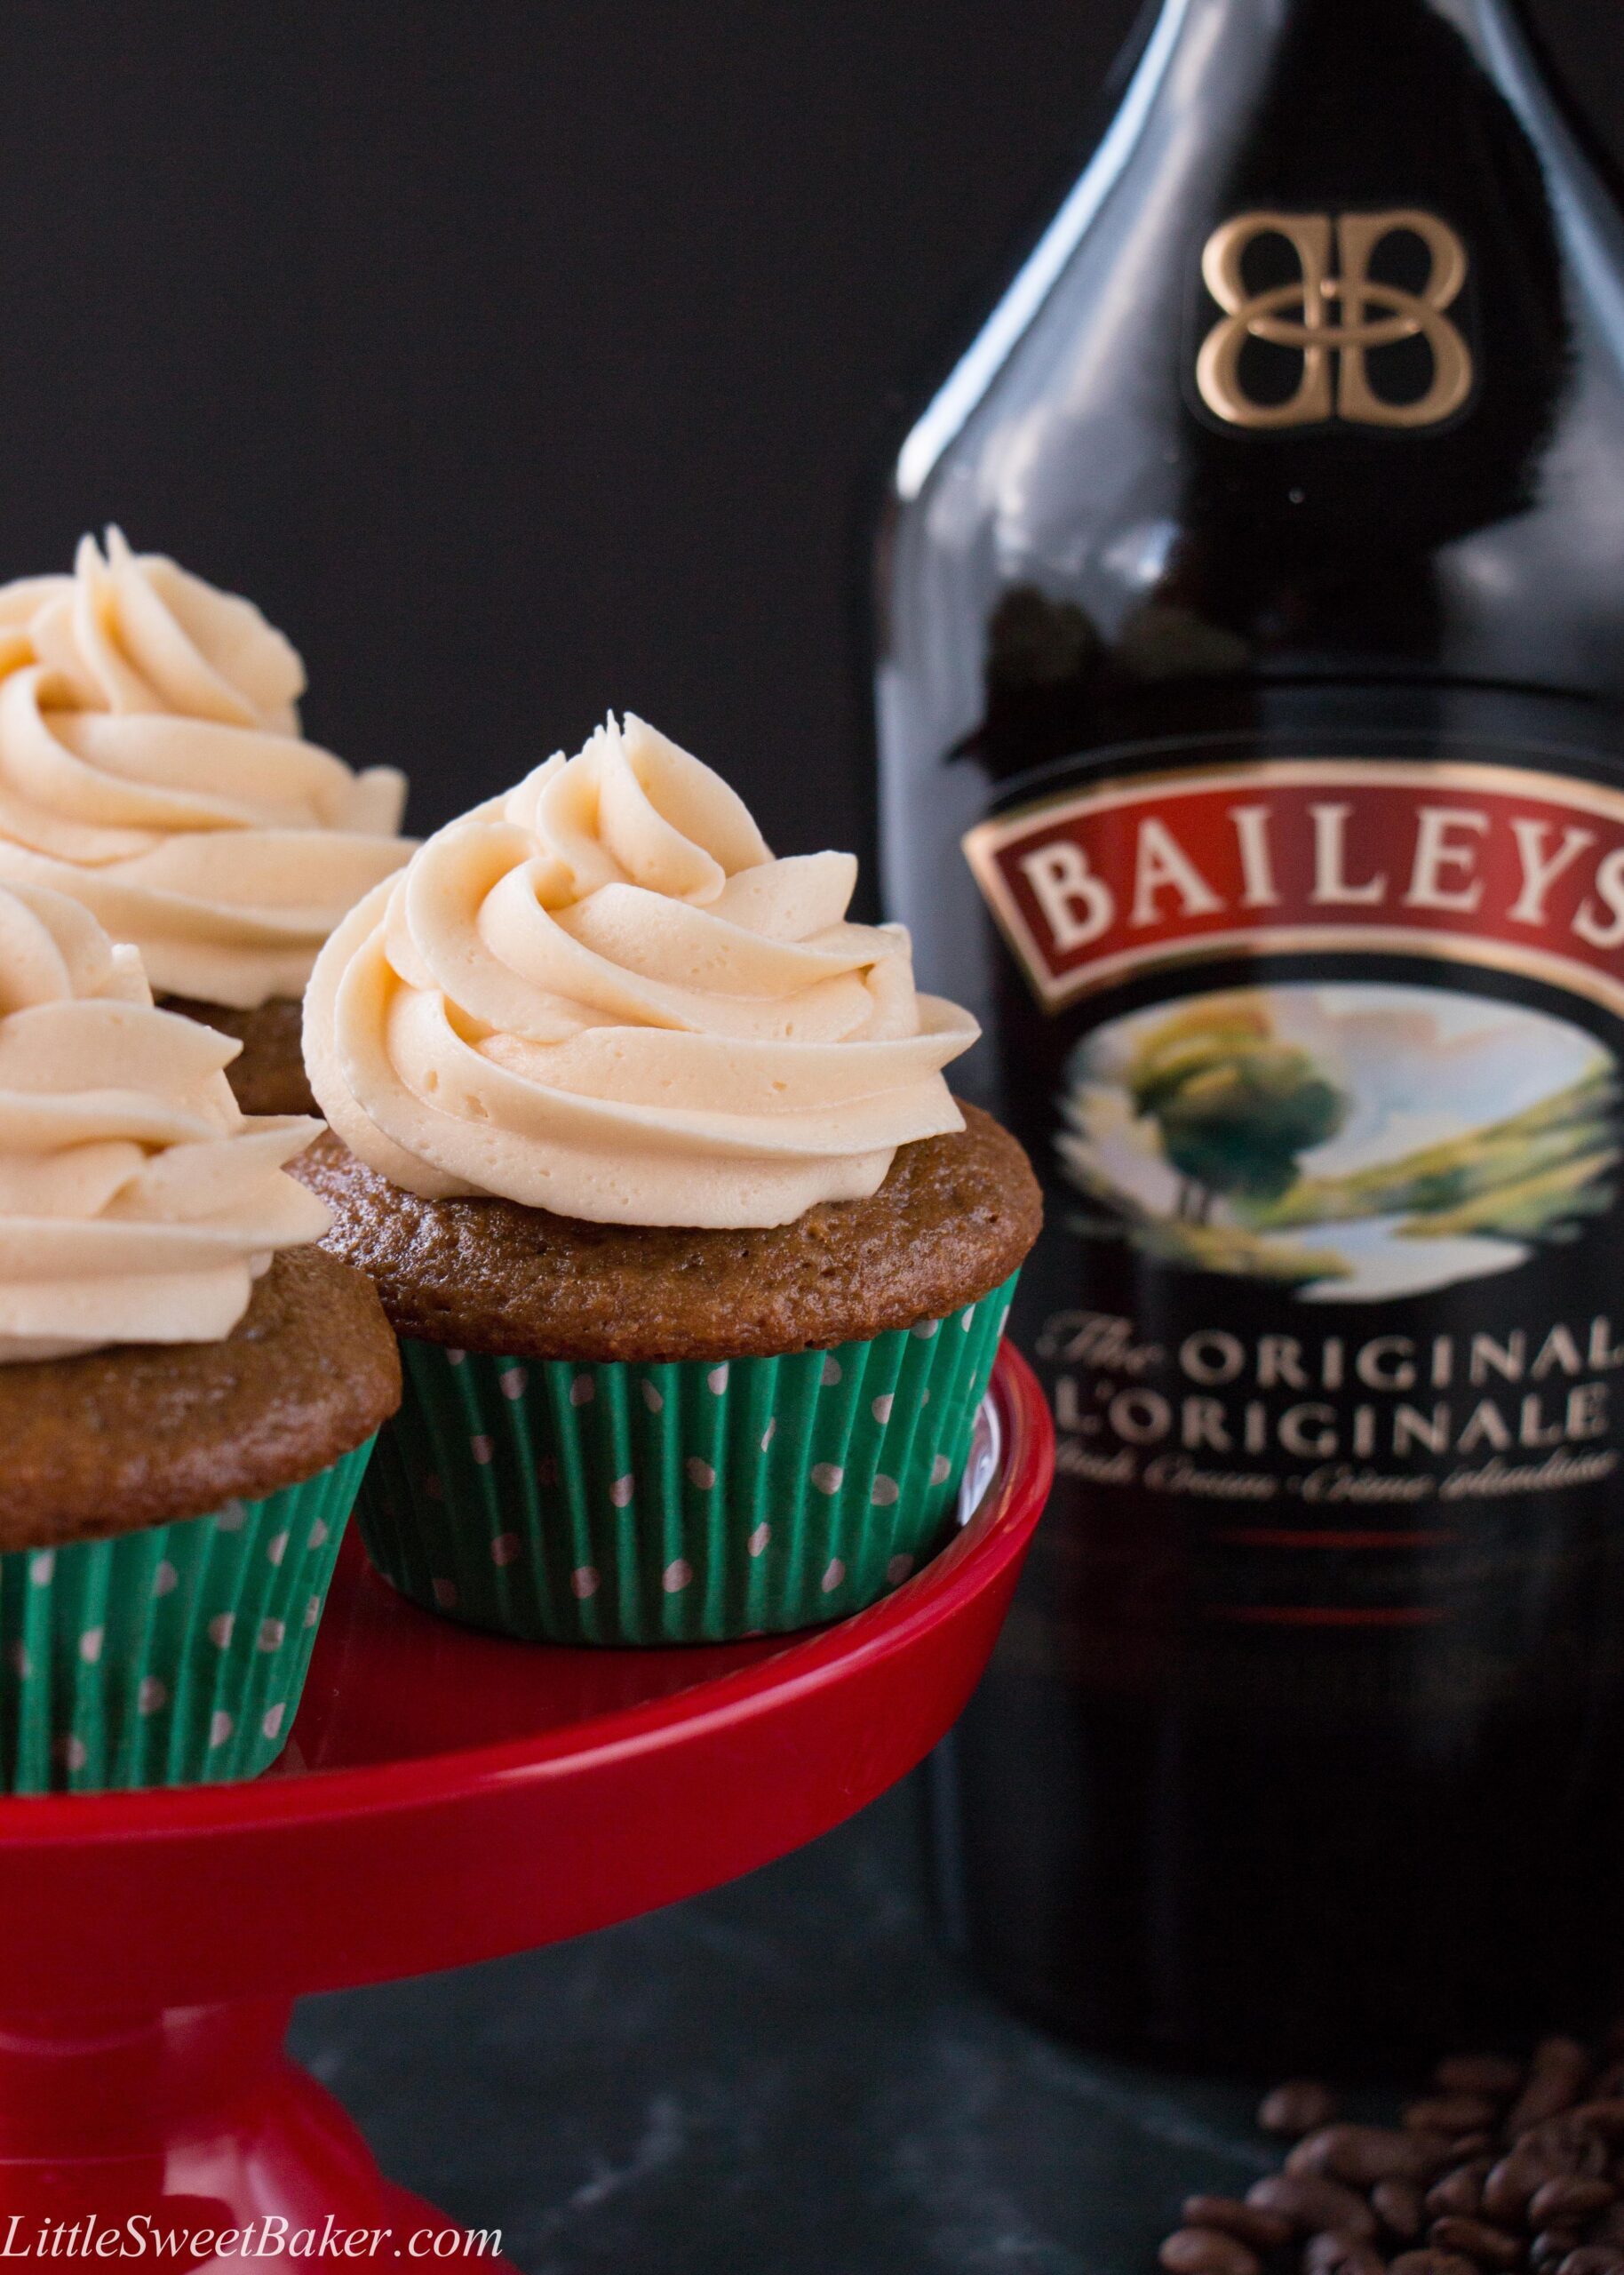  Start your day right with these Bailey's muffins!